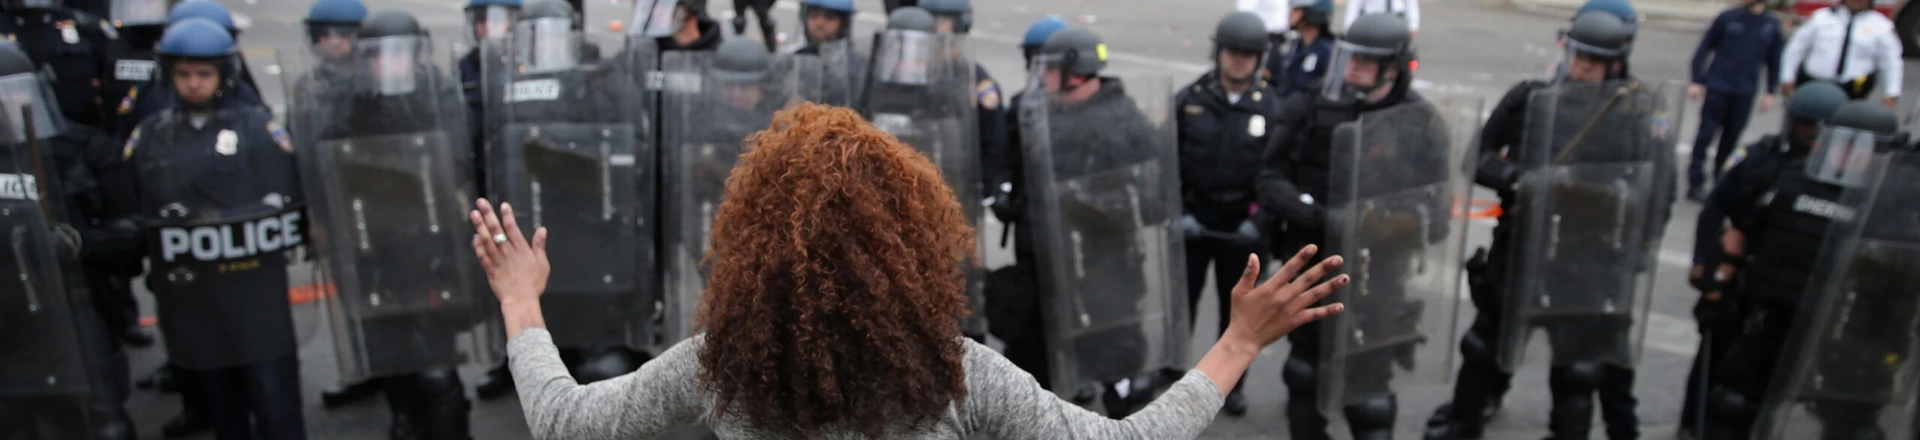 BALTIMORE, MD - APRIL 27:  A woman faces down a line of Baltimore Police officers in riot gear during violent protests following the funeral of Freddie Gray April 27, 2015 in Baltimore, Maryland. Gray, 25, who was arrested for possessing a switch blade knife April 12 outside the Gilmor Homes housing project on Baltimore's west side. According to his attorney, Gray died a week later in the hospital from a severe spinal cord injury he received while in police custody.  (Photo by Chip Somodevilla/Getty Images)